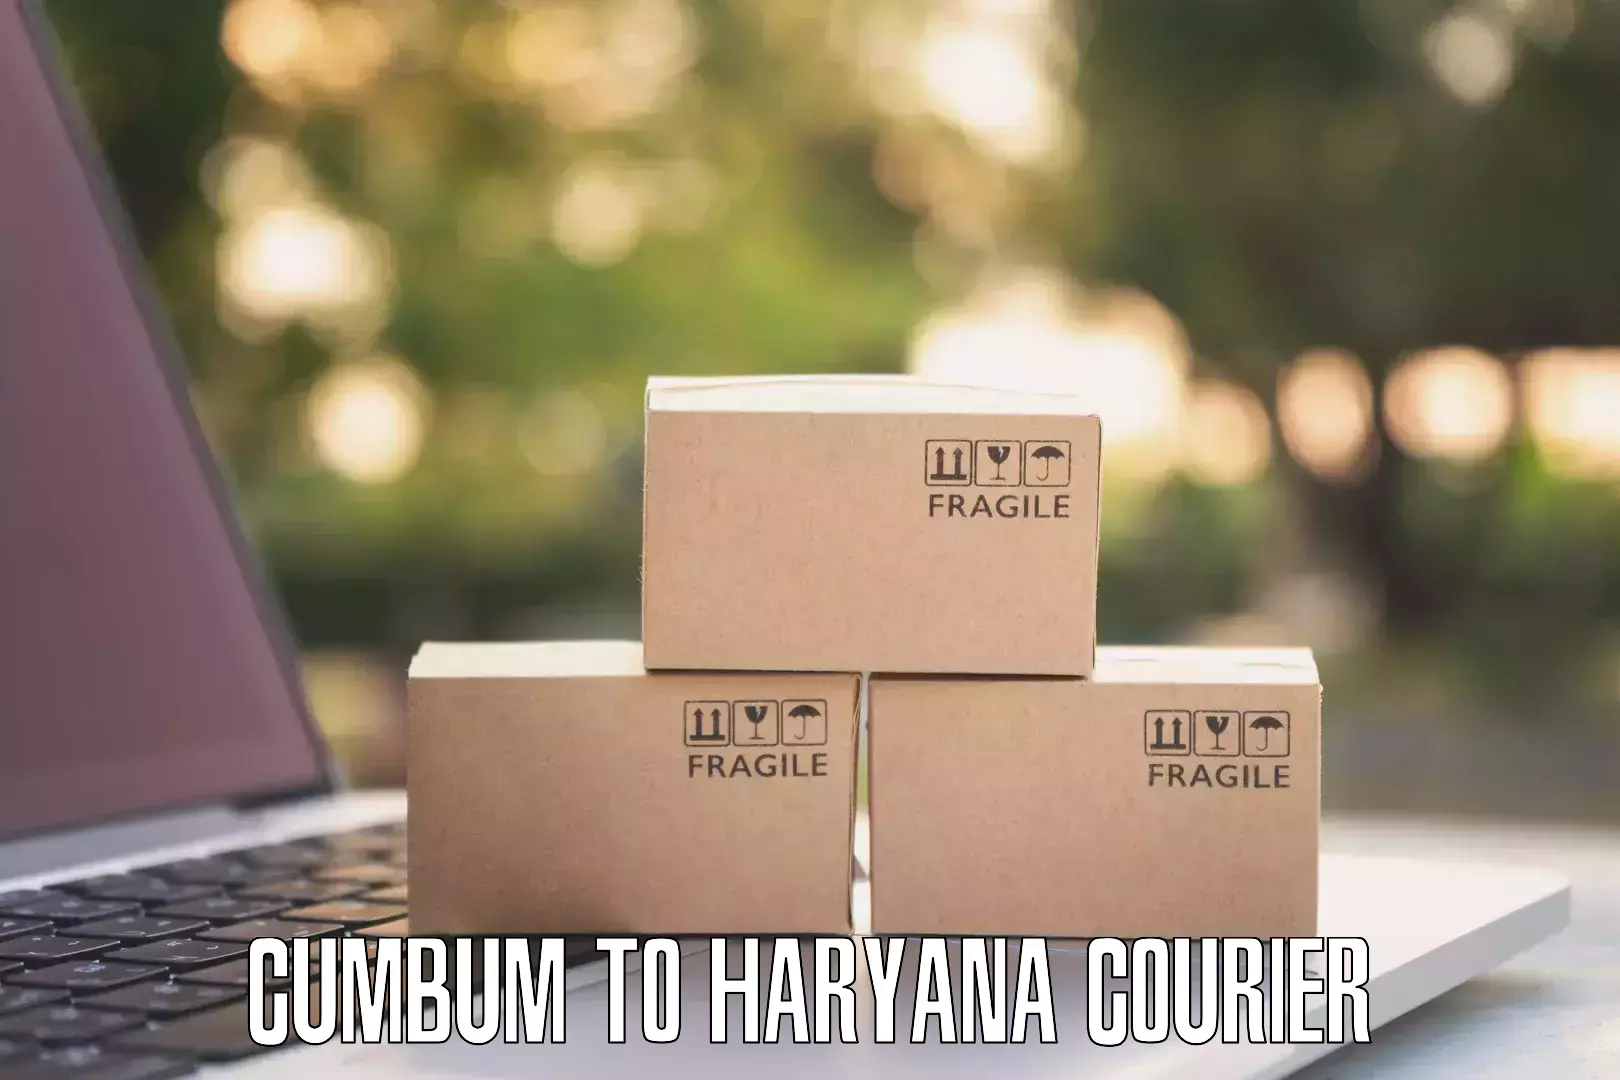 Round-the-clock parcel delivery in Cumbum to Gurgaon